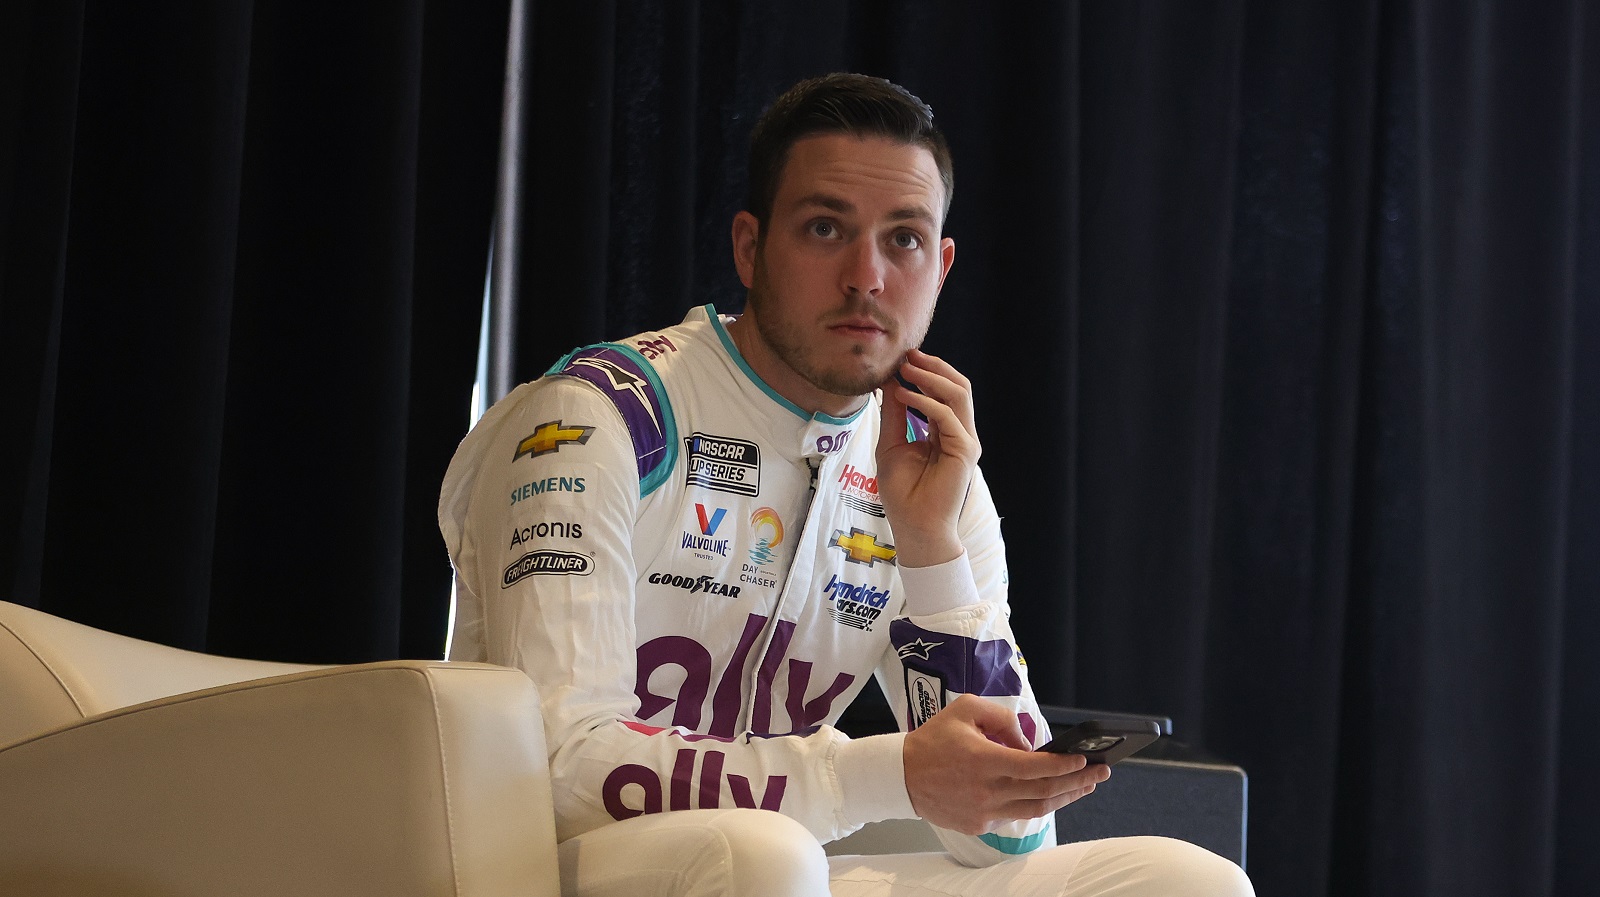 Alex Bowman, driver of the No. 48 Chevrolet, waits to speak to reporters during the NASCAR Cup Series Daytona 500 Media Day. | James Gilbert/Getty Images